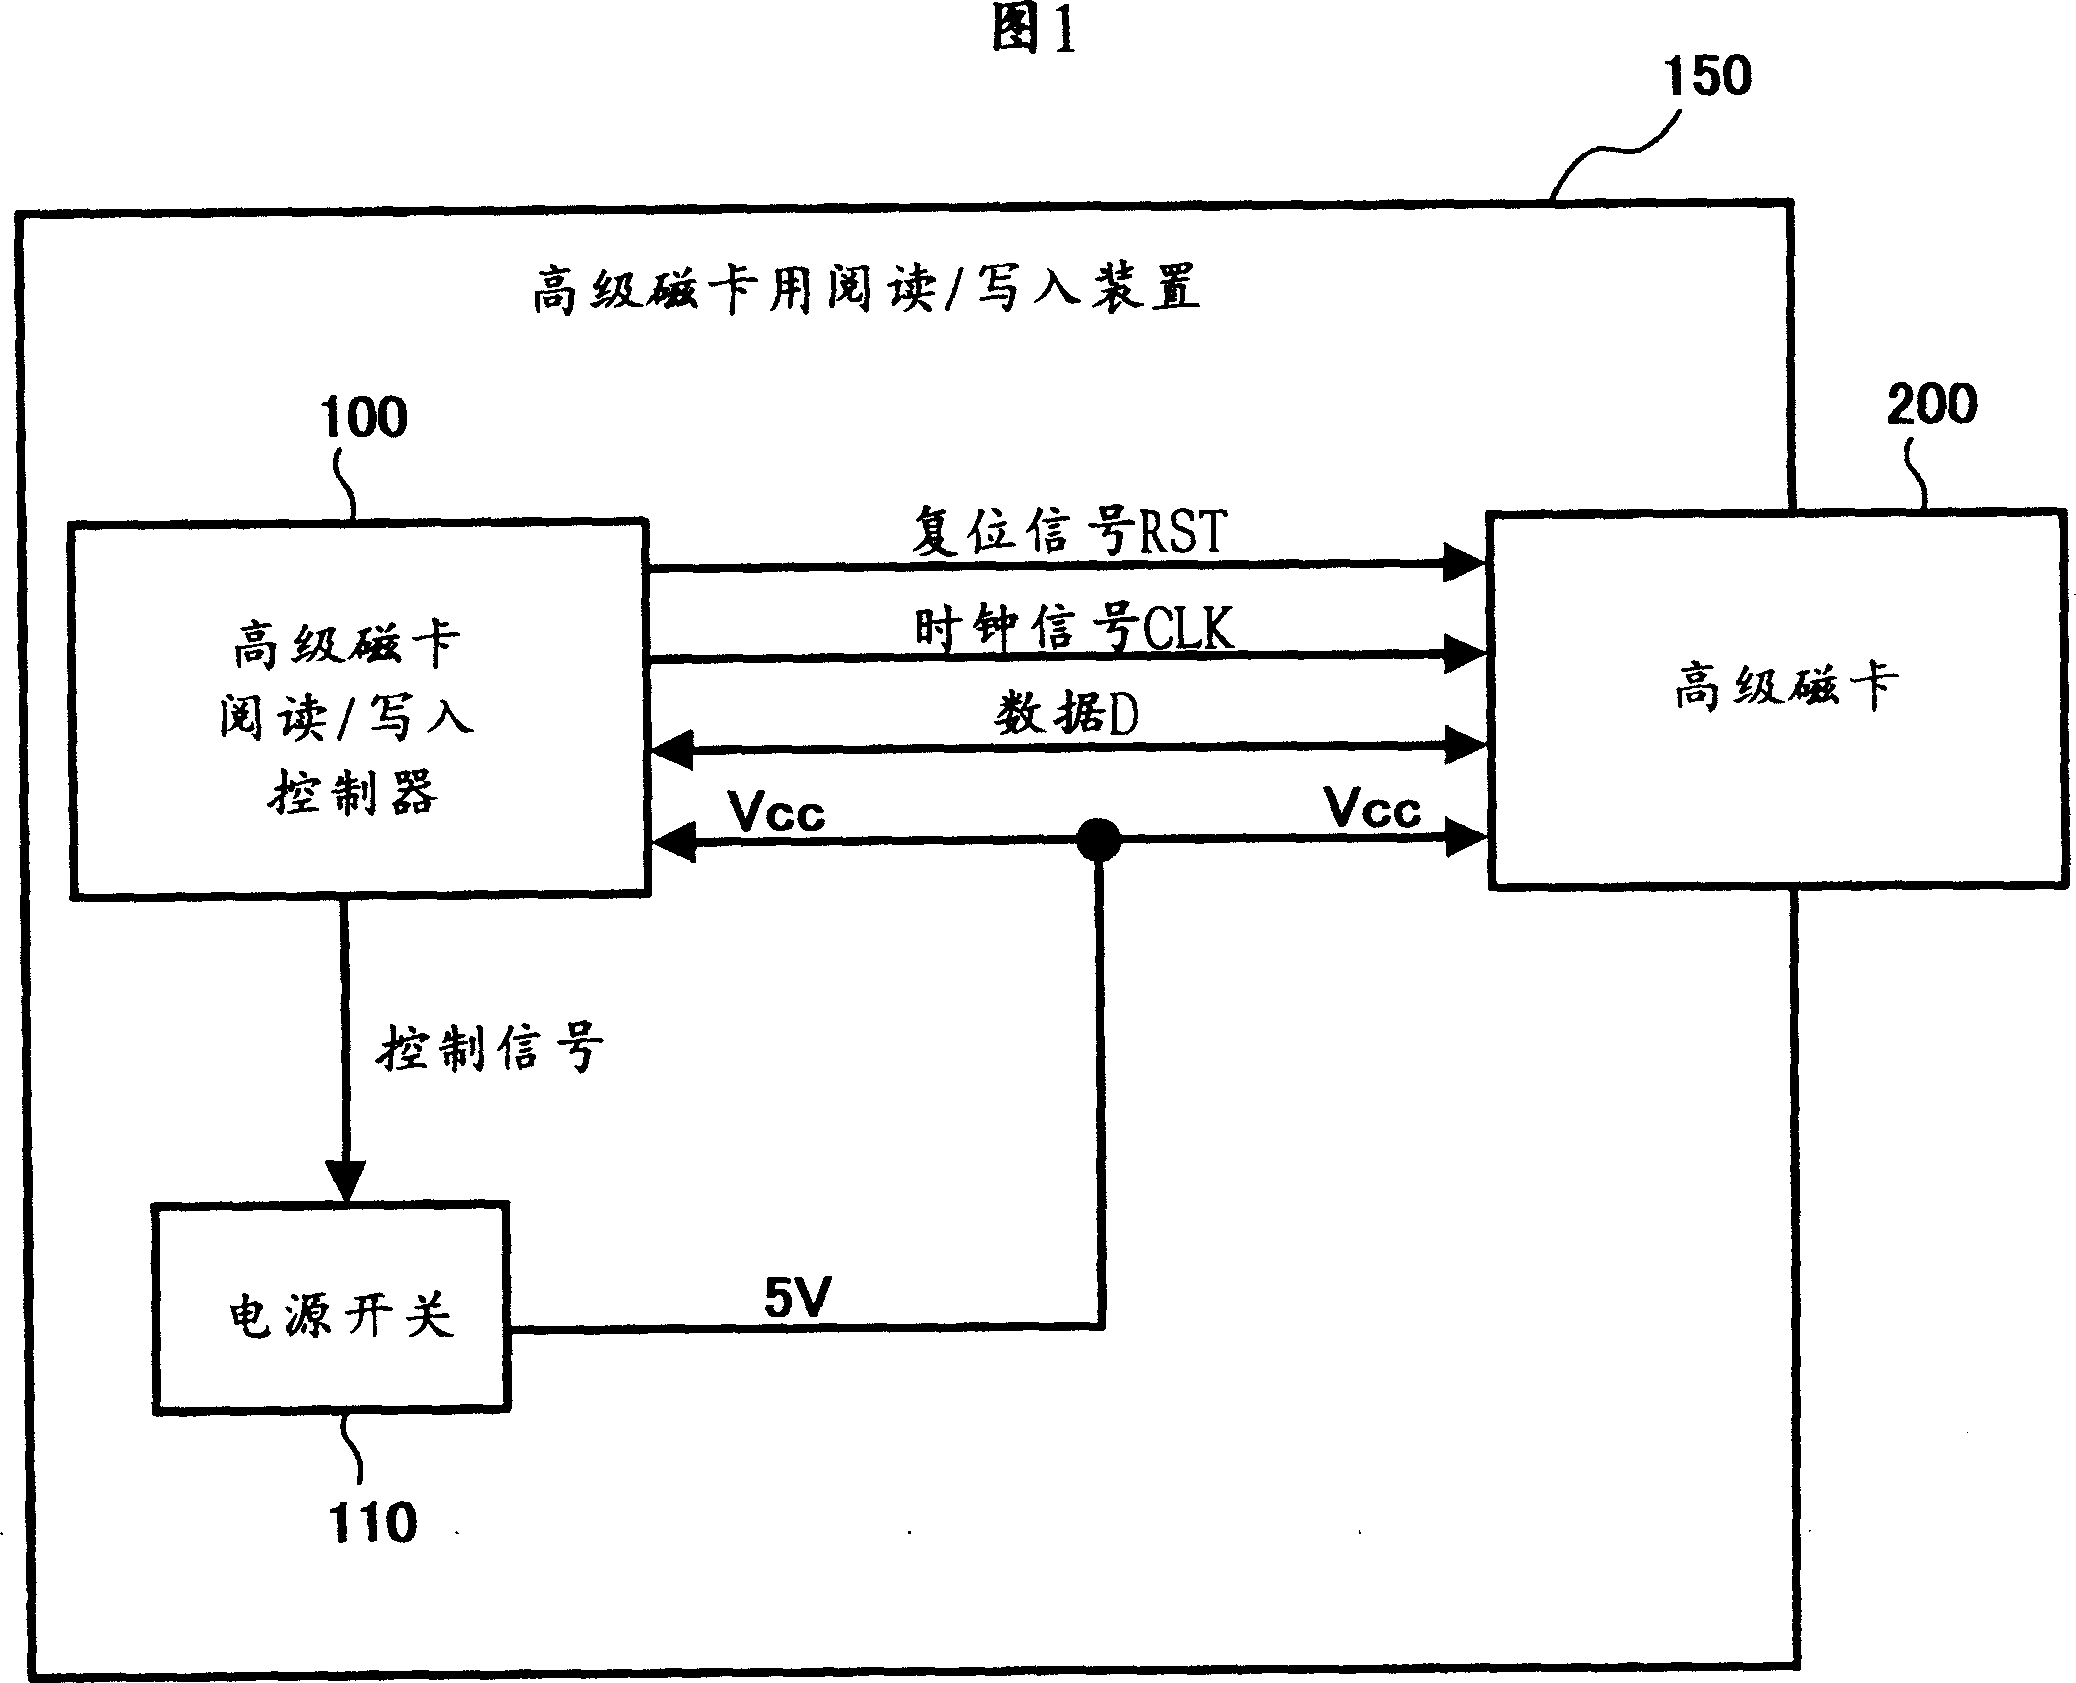 Semiconductor apparatus and processing system utilizing the same semiconductor apparatus